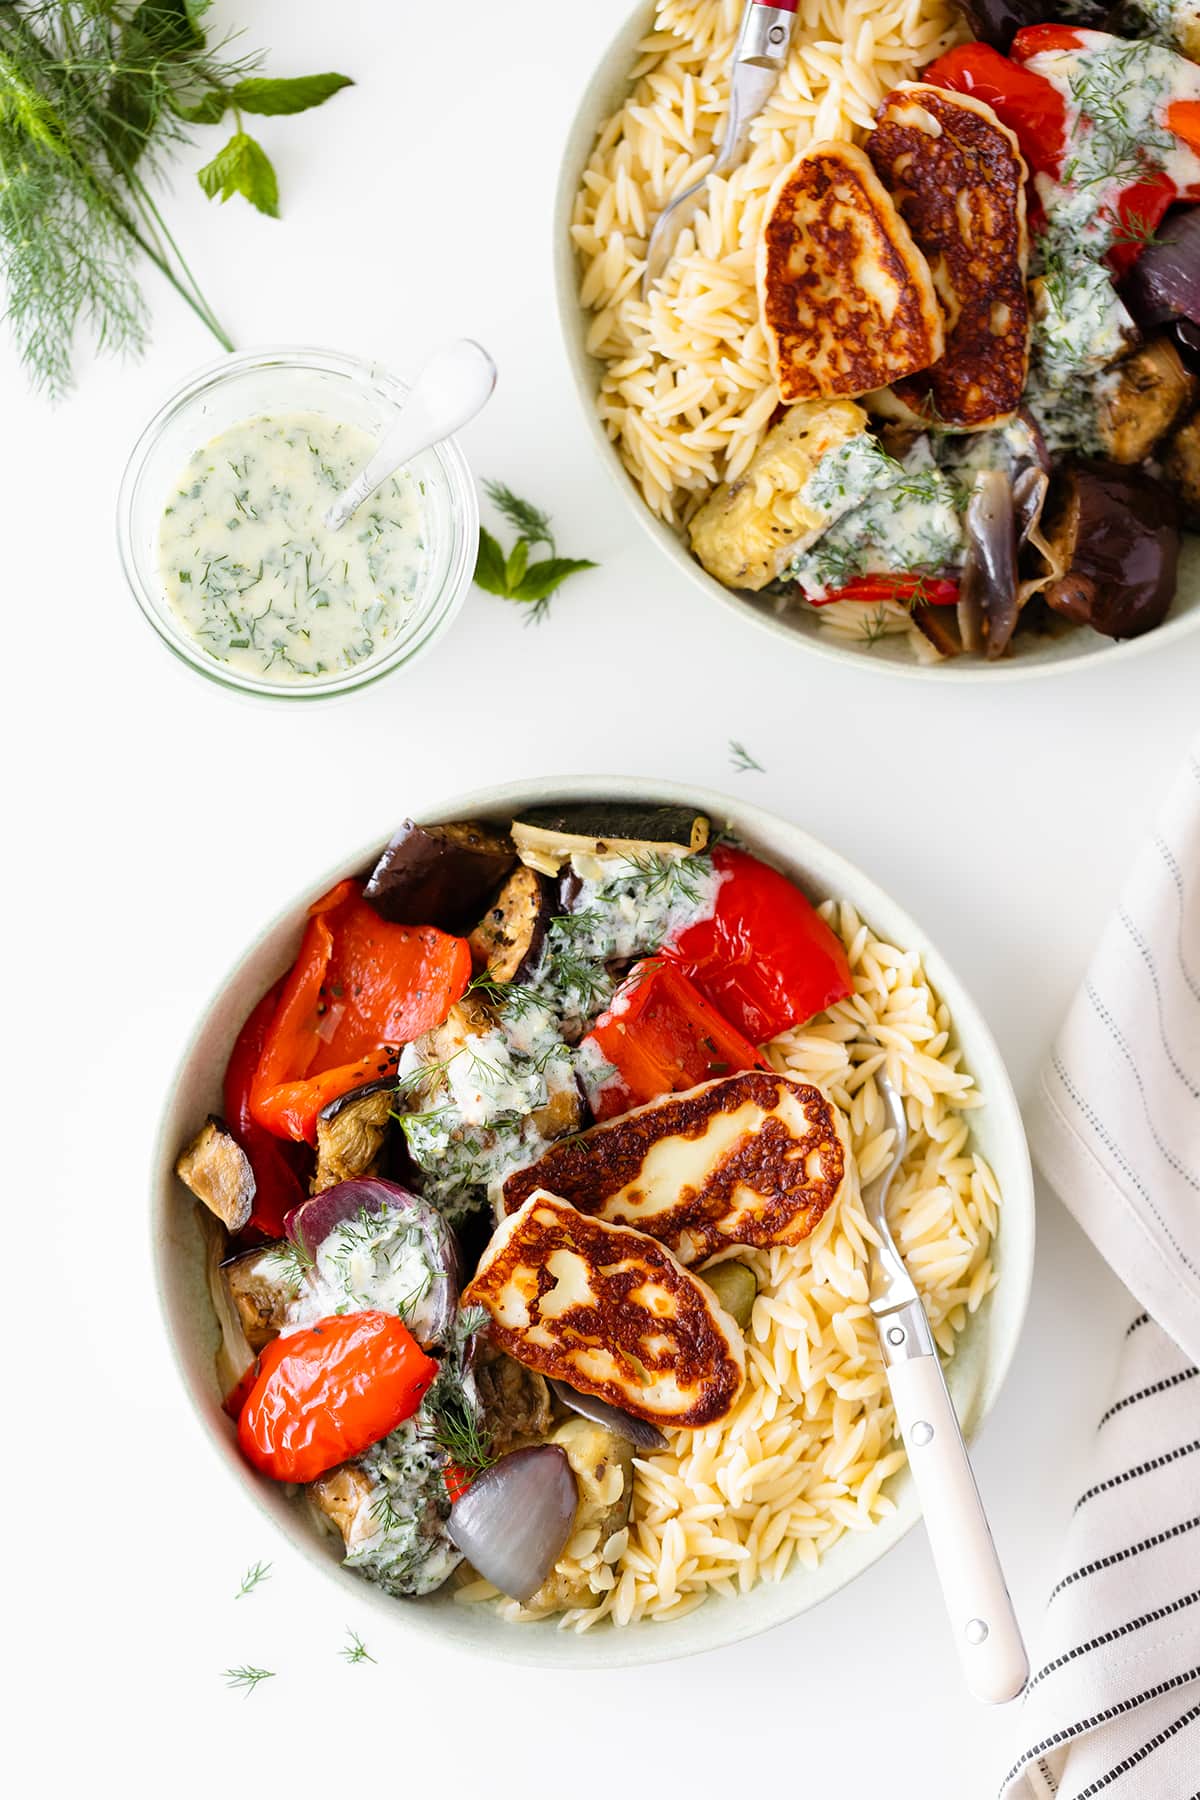 Halloumi Orzo Bowl with Roasted Vegetables and Yogurt Dill Sauce on two plates on a white table decorated with fresh herbs and a striped cloth on the right side of the frame. Overhead shot